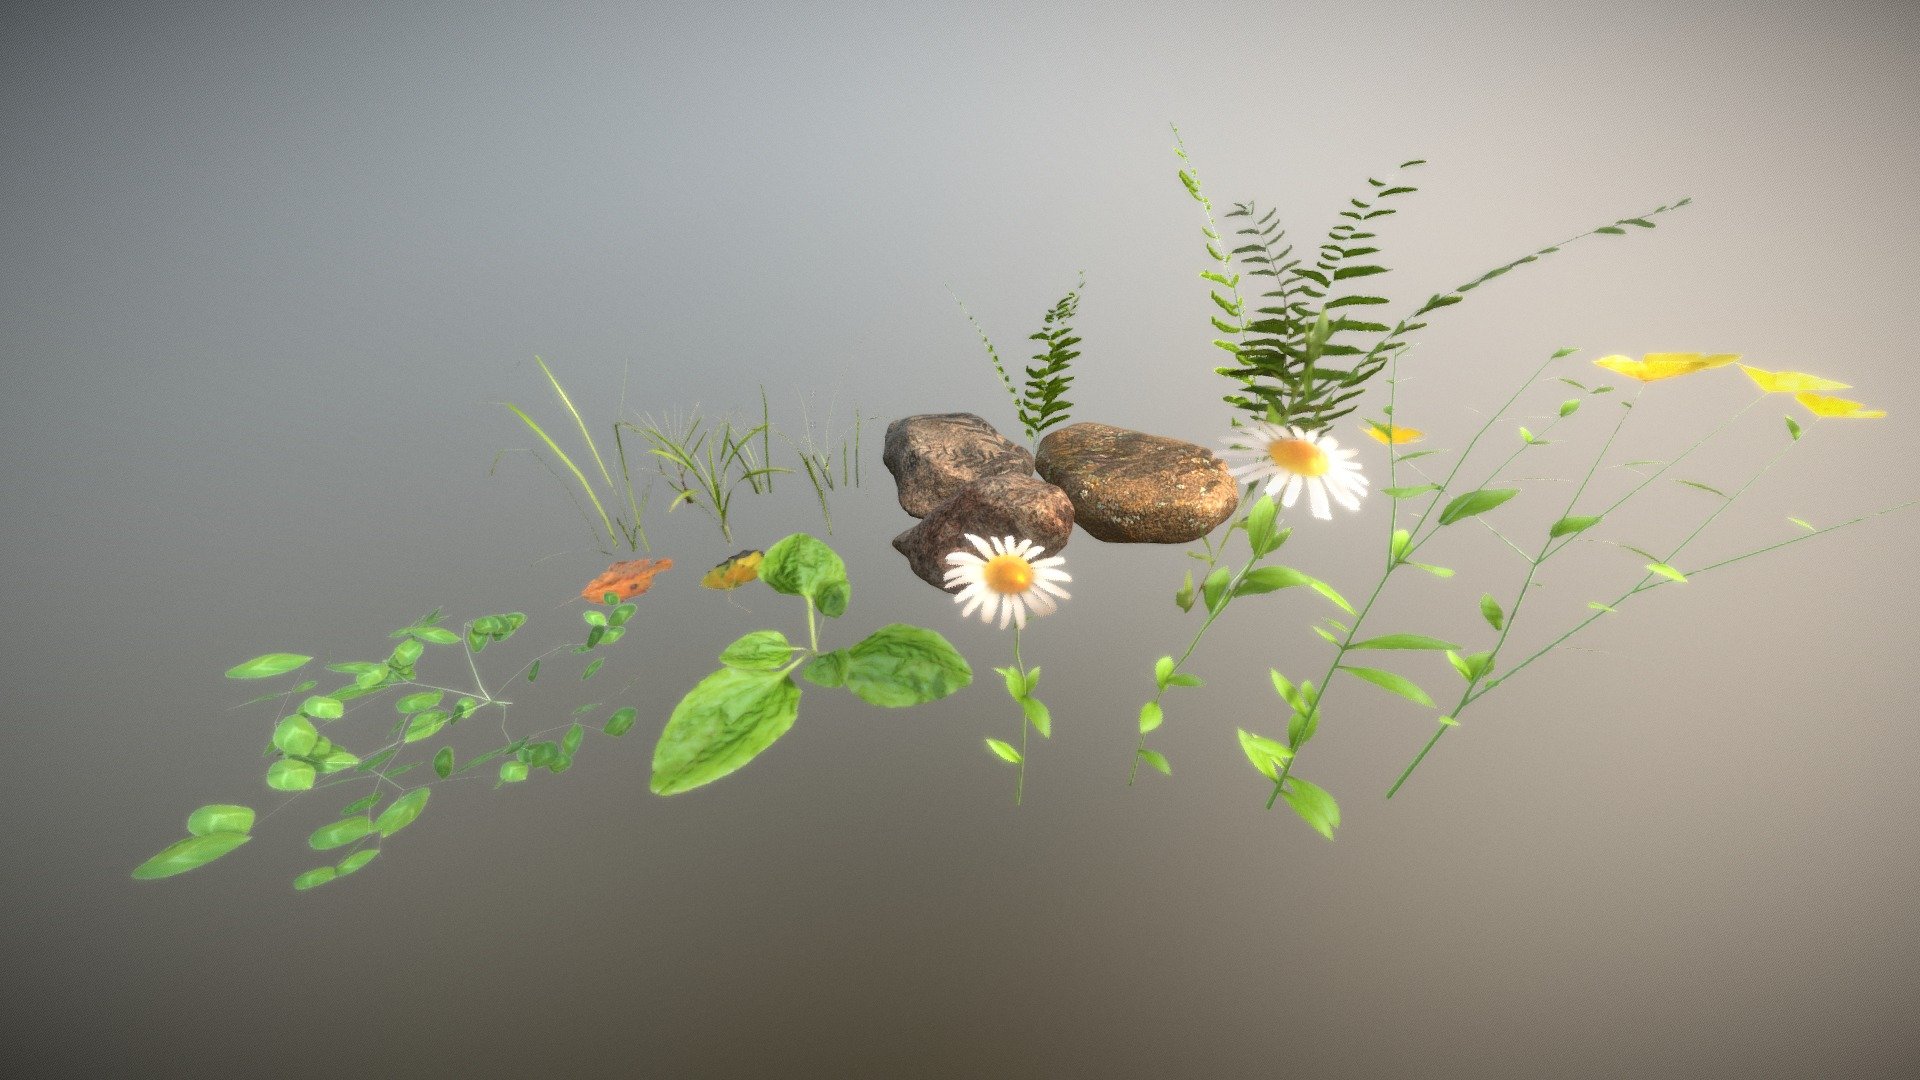 Easily Add Realistic Nature to any scene!
Tired of spending hours tediously modeling and texturing nature assets for all your scenes? So was I! And that's why I've created this pack of 19 different nature models to quickly add realistic nature to any render! 

Features
• 17 Professionally modeled and textured nature assets • 3 Rock models • 5  Grass models • 4 Flower models • 5 Weed/leaf models • 17 Unique nature textures • Easy to use material groups • Randomizing color on all assets • Easily add Subsurface Scattering • Glossy and Bump settings - Realistic Nature Asset Pack - Buy Royalty Free 3D model by CG Geek (@webhead) 3d model